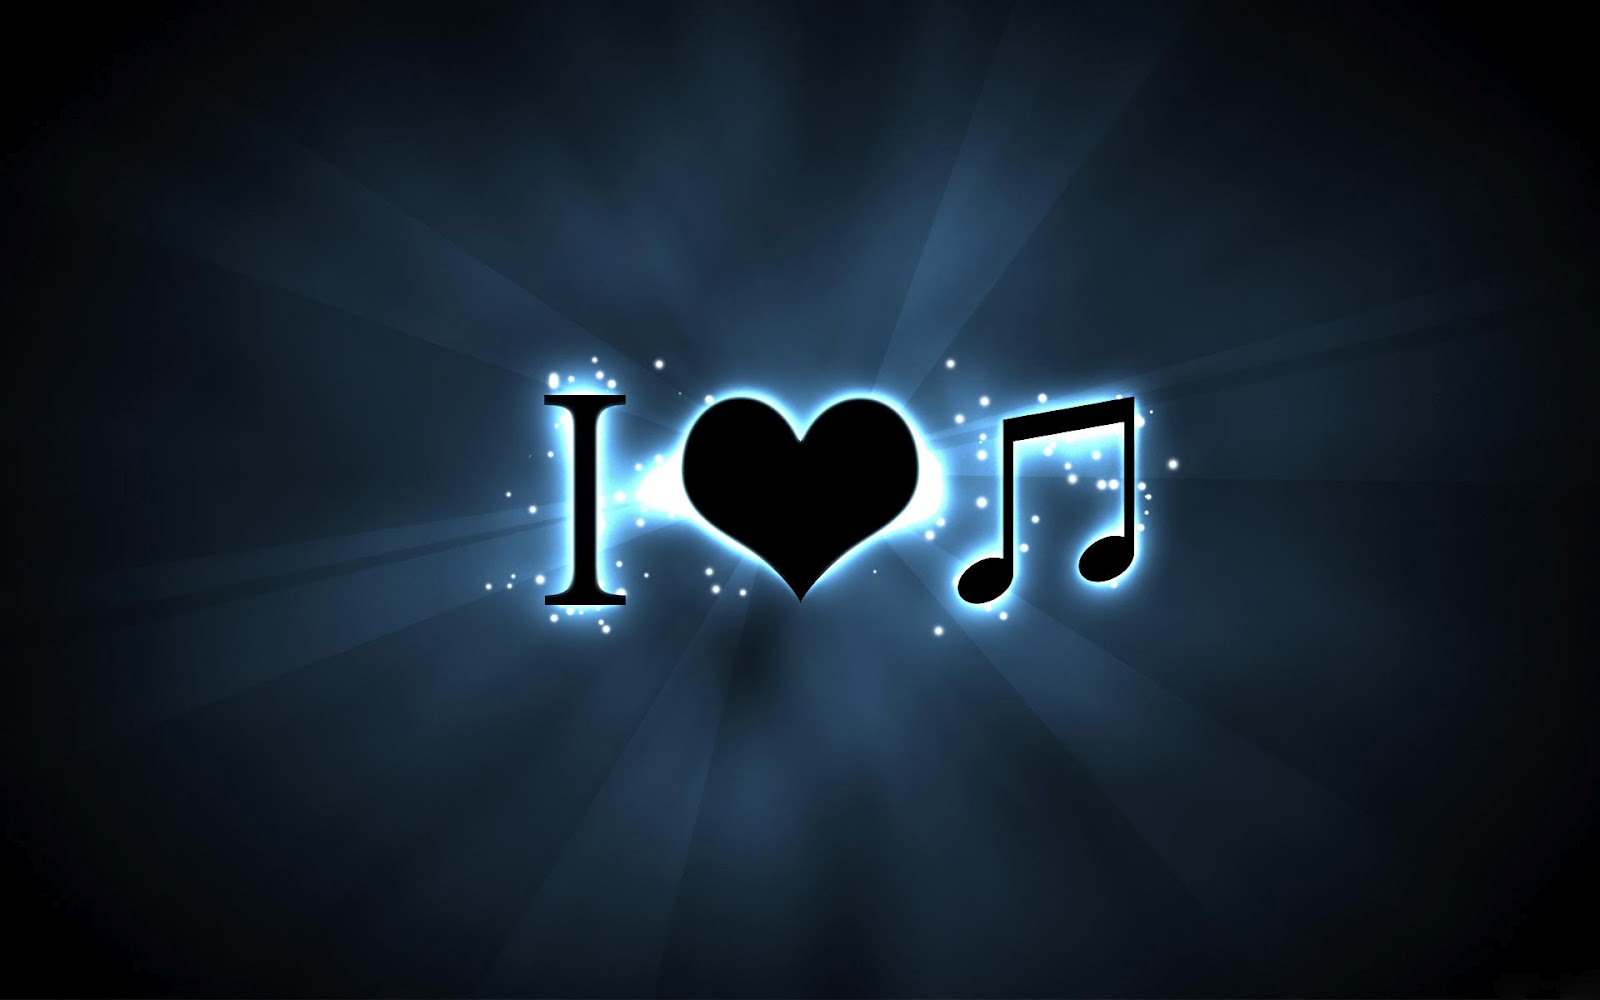 Download Free 100 + song wallpaper